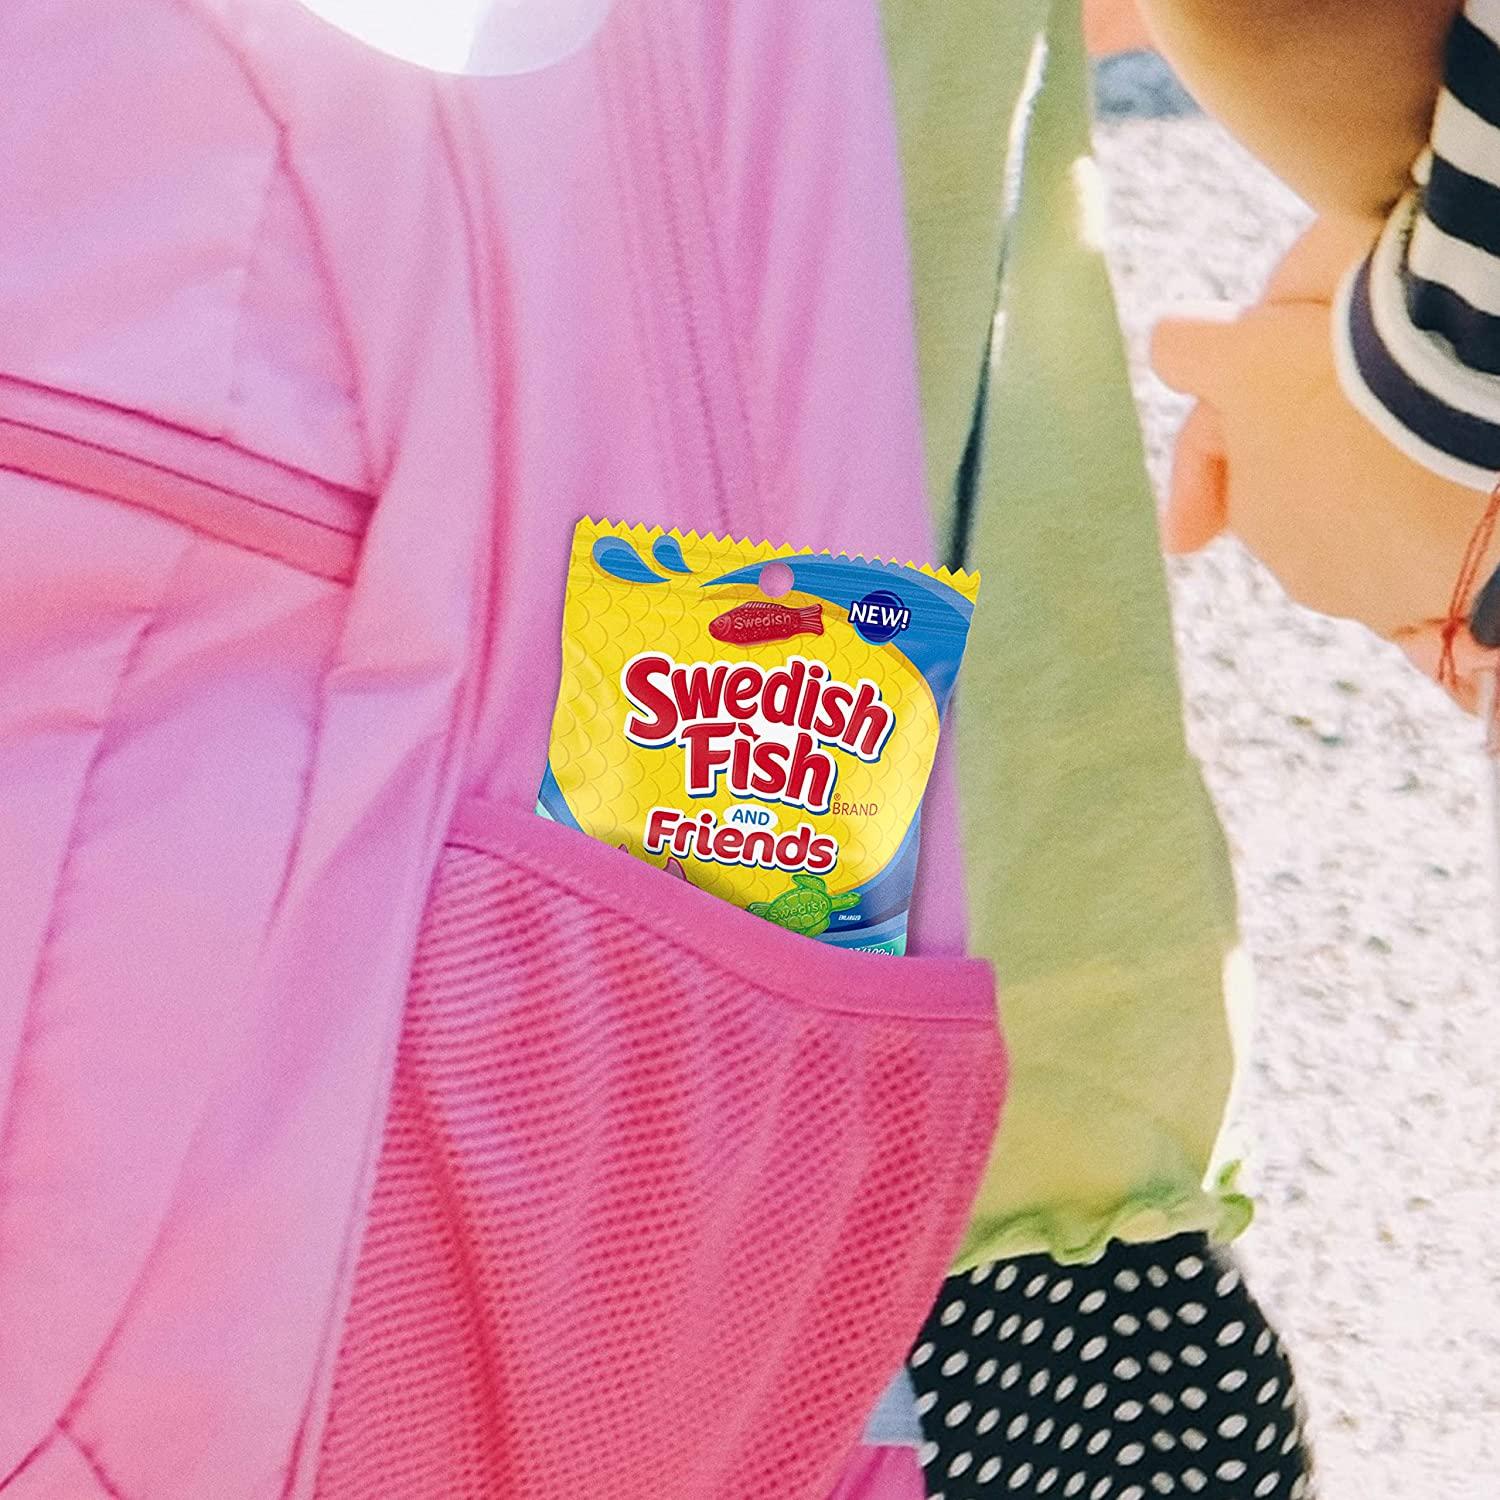 SWEDISH FISH and Friends Soft & Chewy Candy, 3.59 oz 